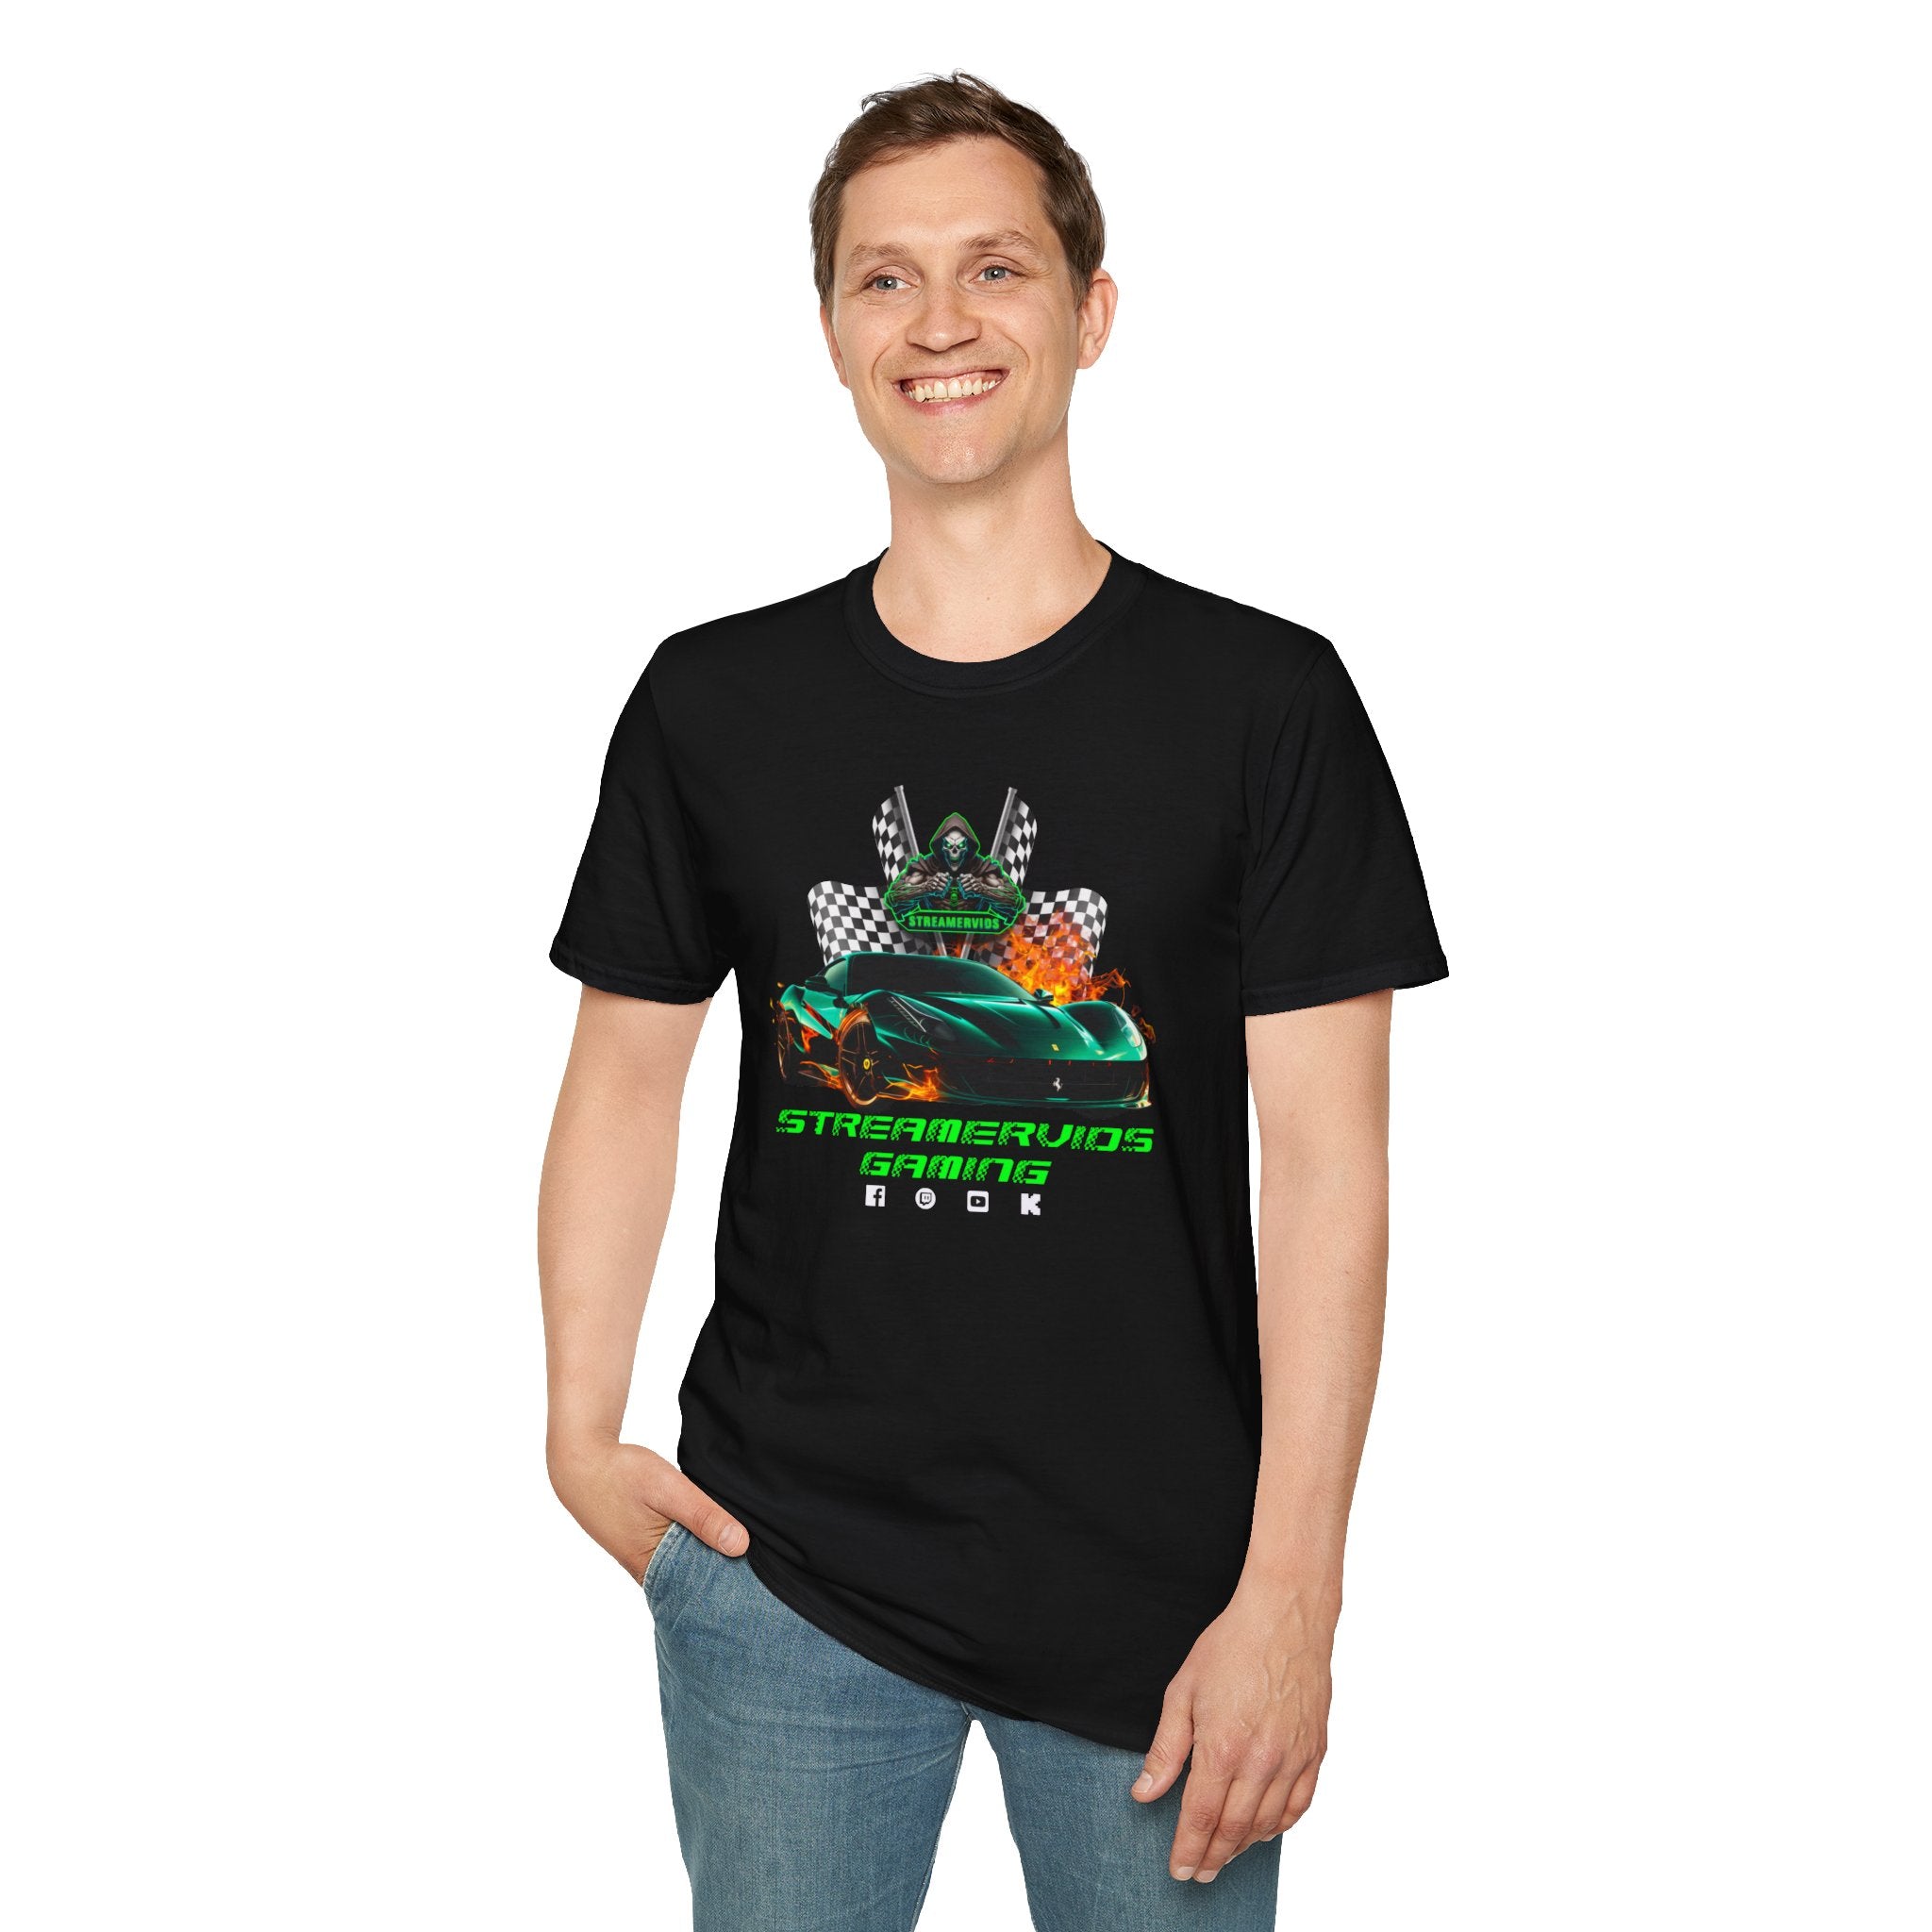 StreamerVids Gaming Racing Car T-Shirt with checkered flags.